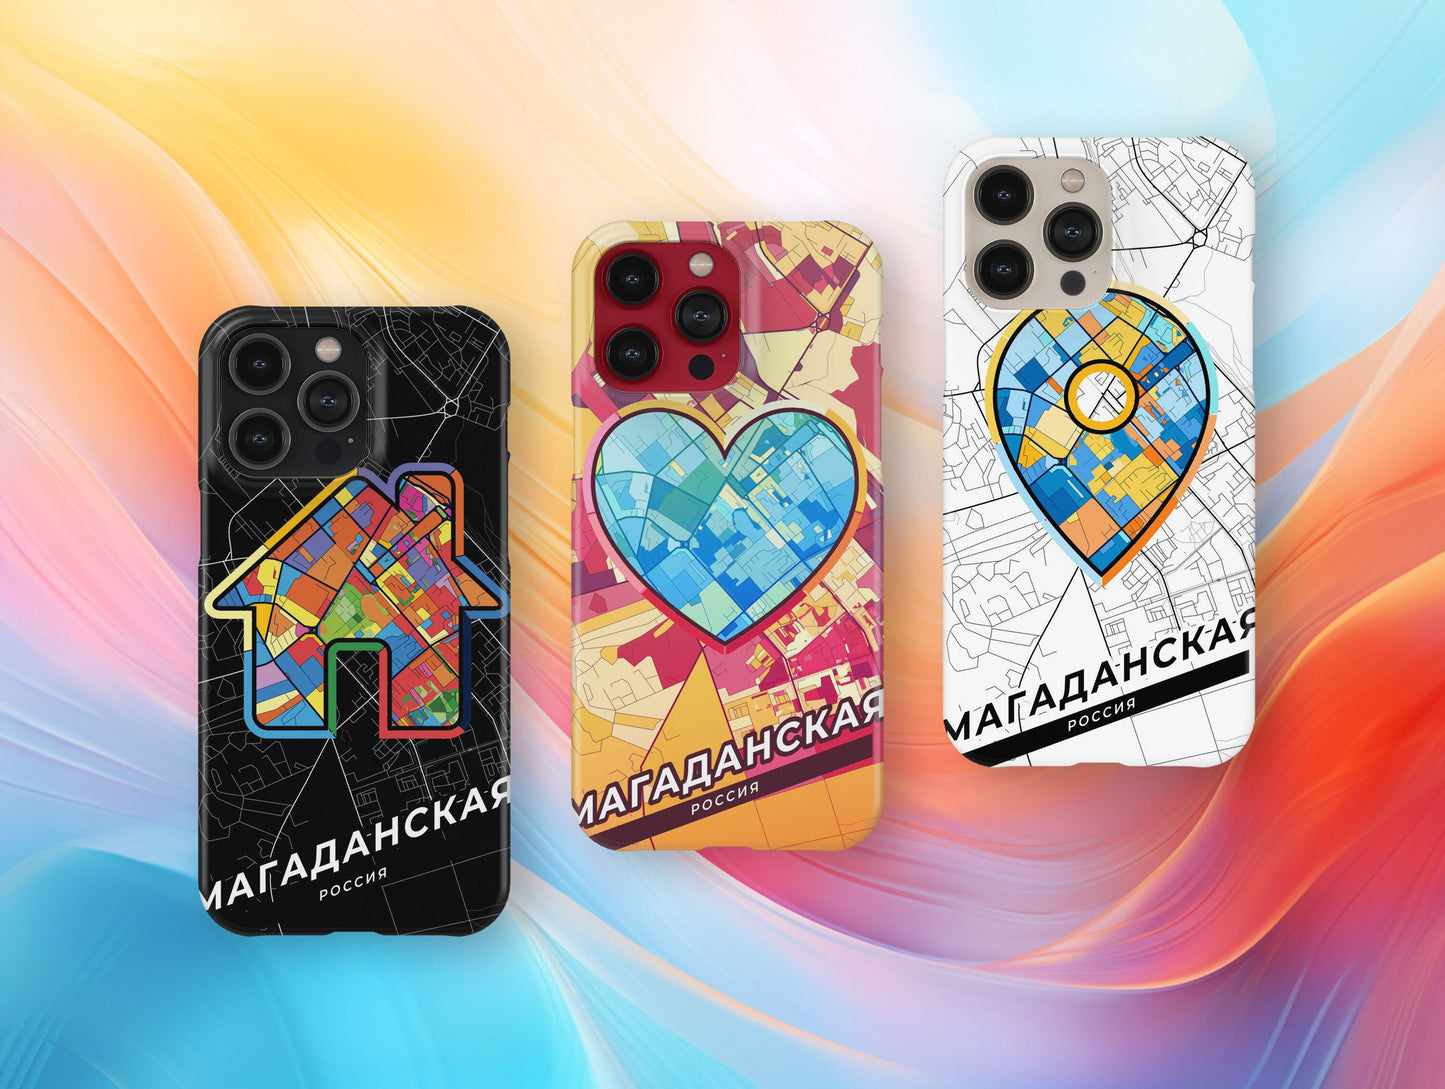 Magadan Russia slim phone case with colorful icon. Birthday, wedding or housewarming gift. Couple match cases.